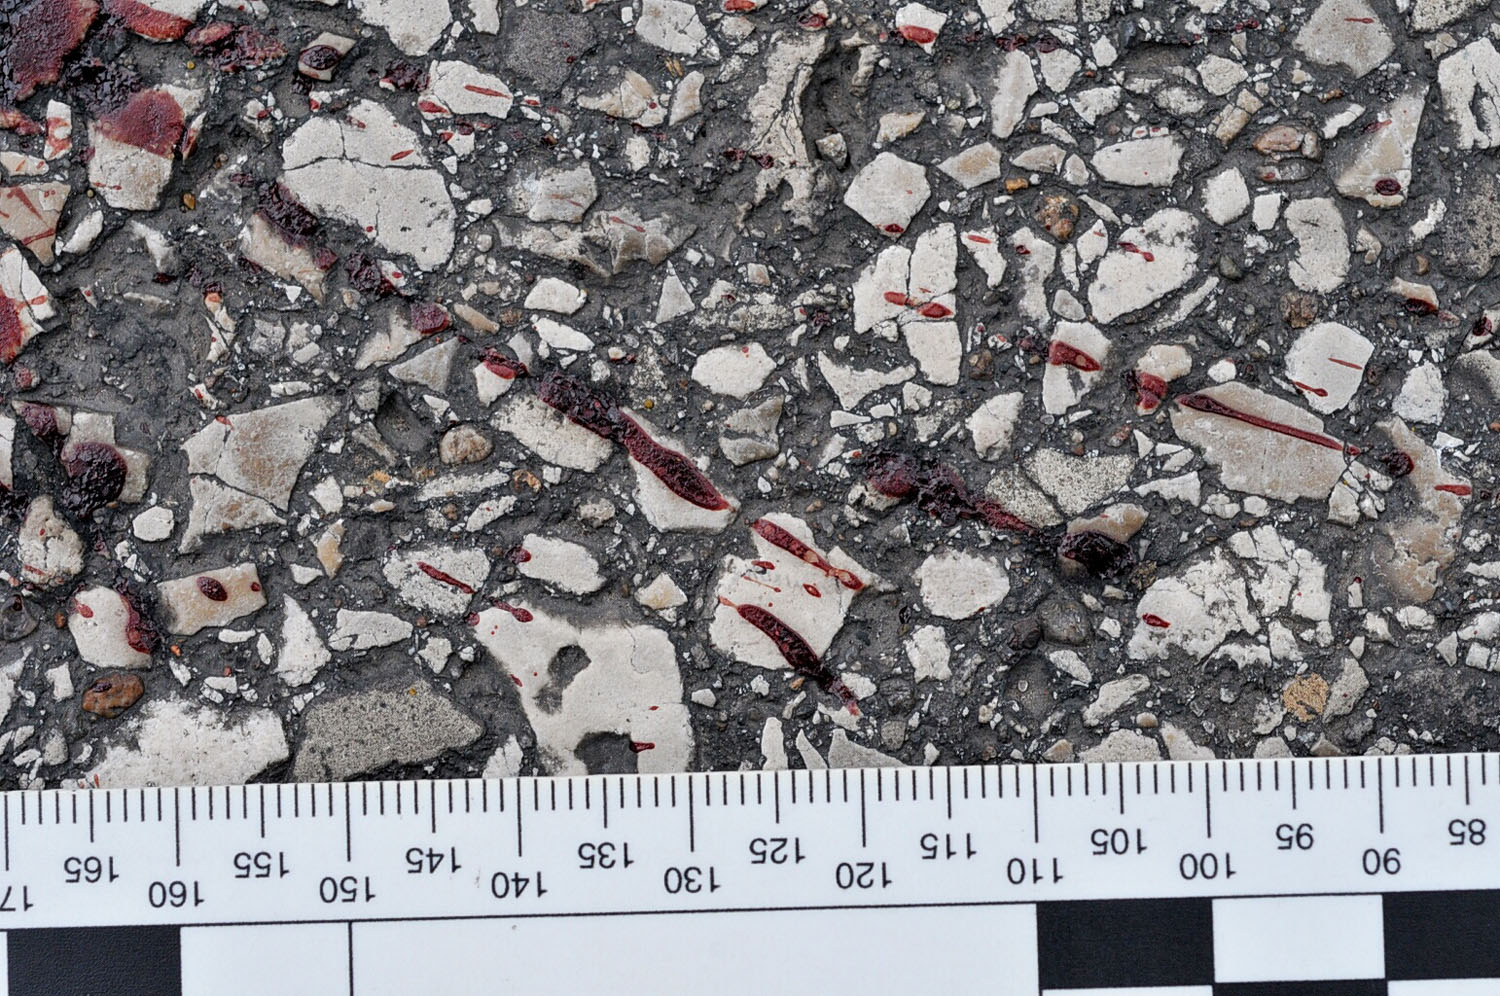 An undated evidence photograph made available by the St. Louis County prosecutors office on Nov. 25, 2014 shows blood stains on the street pavement from teenager Michael Brown's body following his shooting by Ferguson police officer Darren Wilson in Ferguson, Mo., in August 2014.